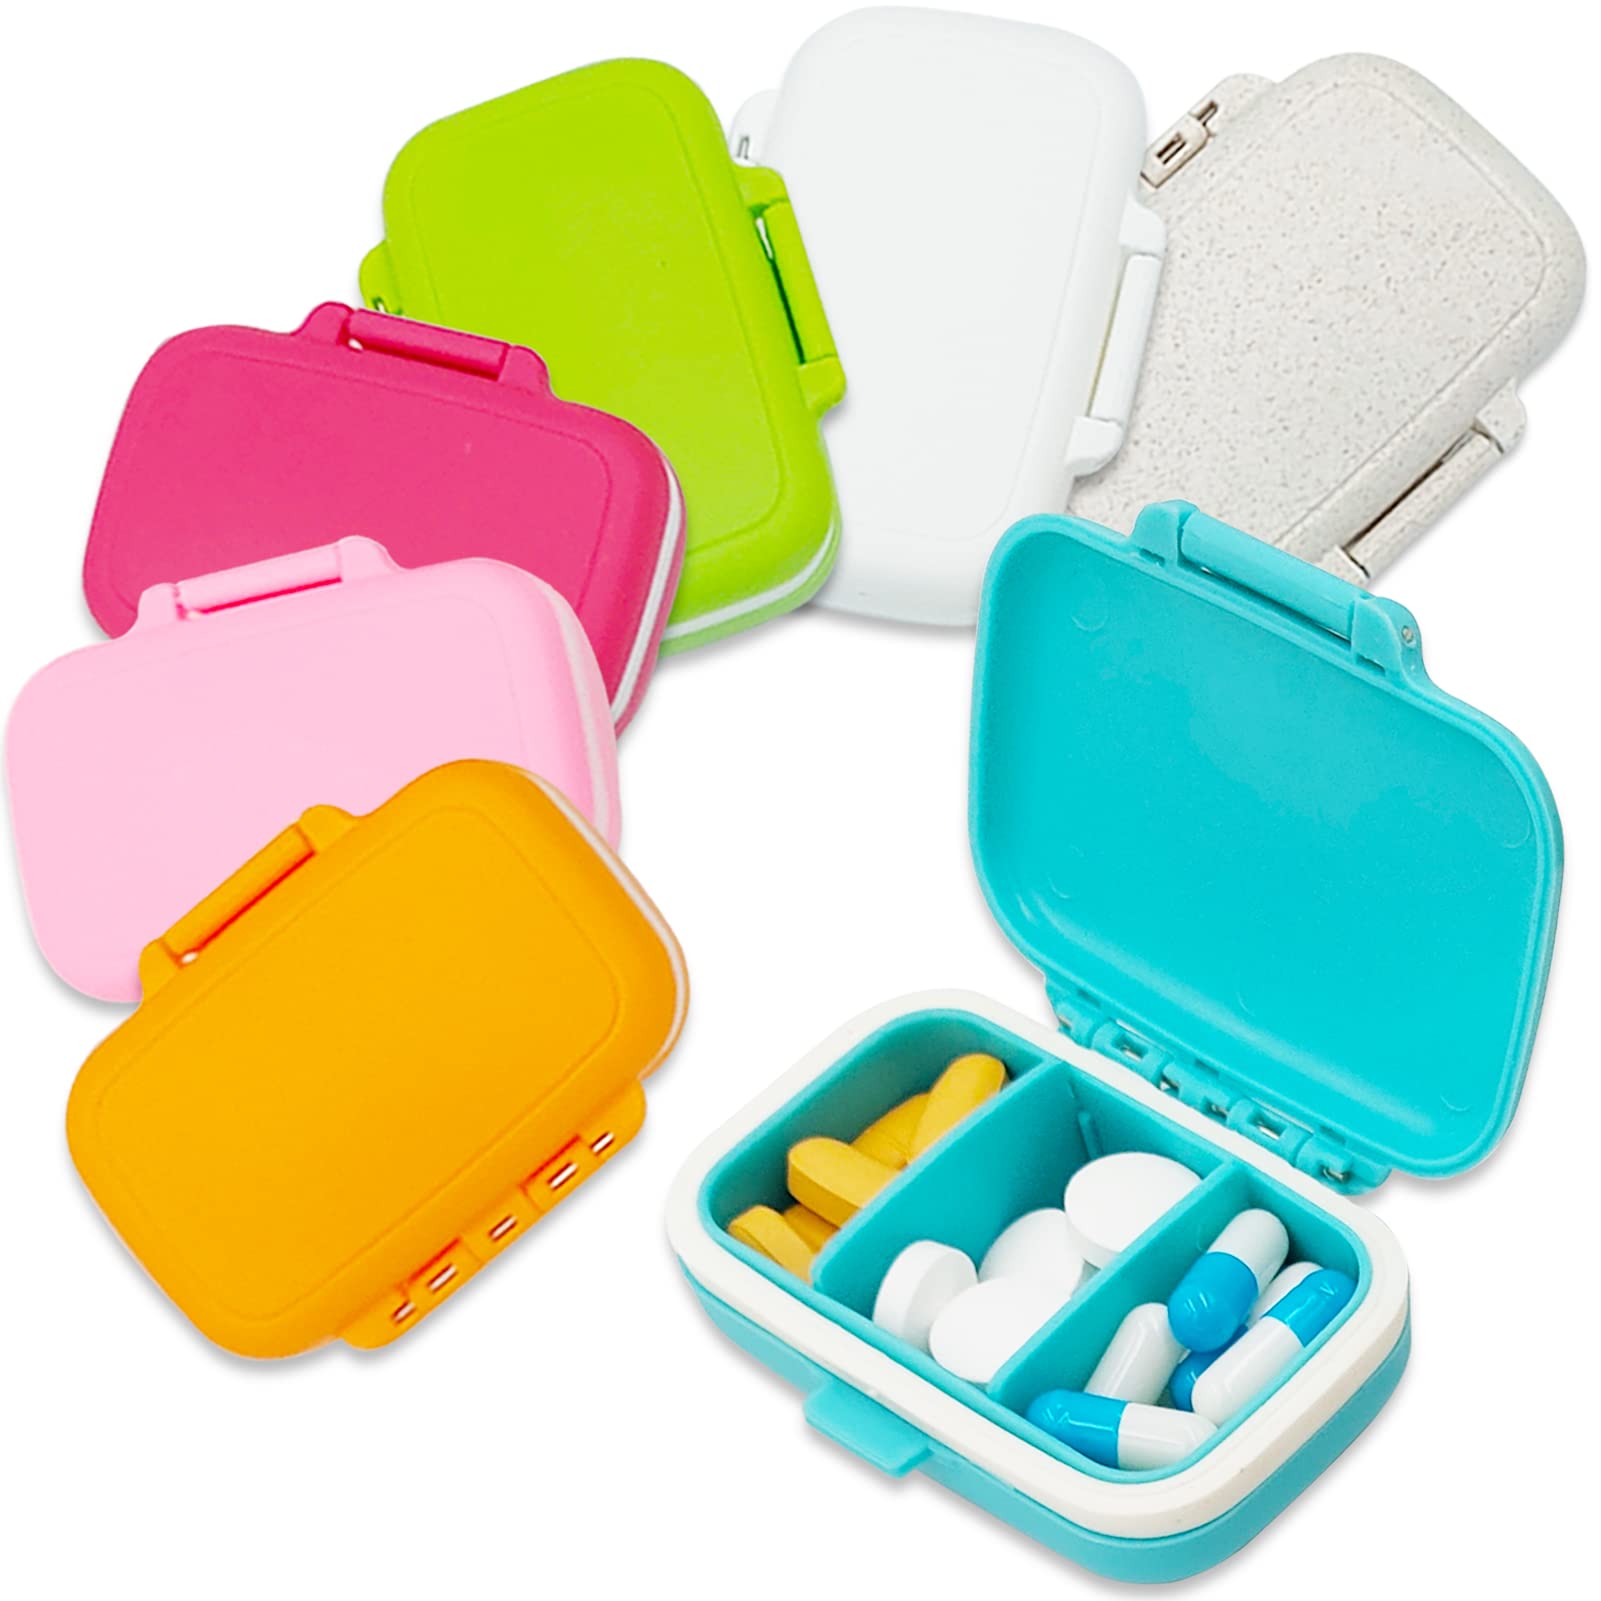 Pill Mill Pill Bag Count - Size 3 inch x 2 inch 3 Mil Plastic Pill Organizer Bags Small Pocket Pill Baggies Travel Pill Pouch Daily Am PM Medicine